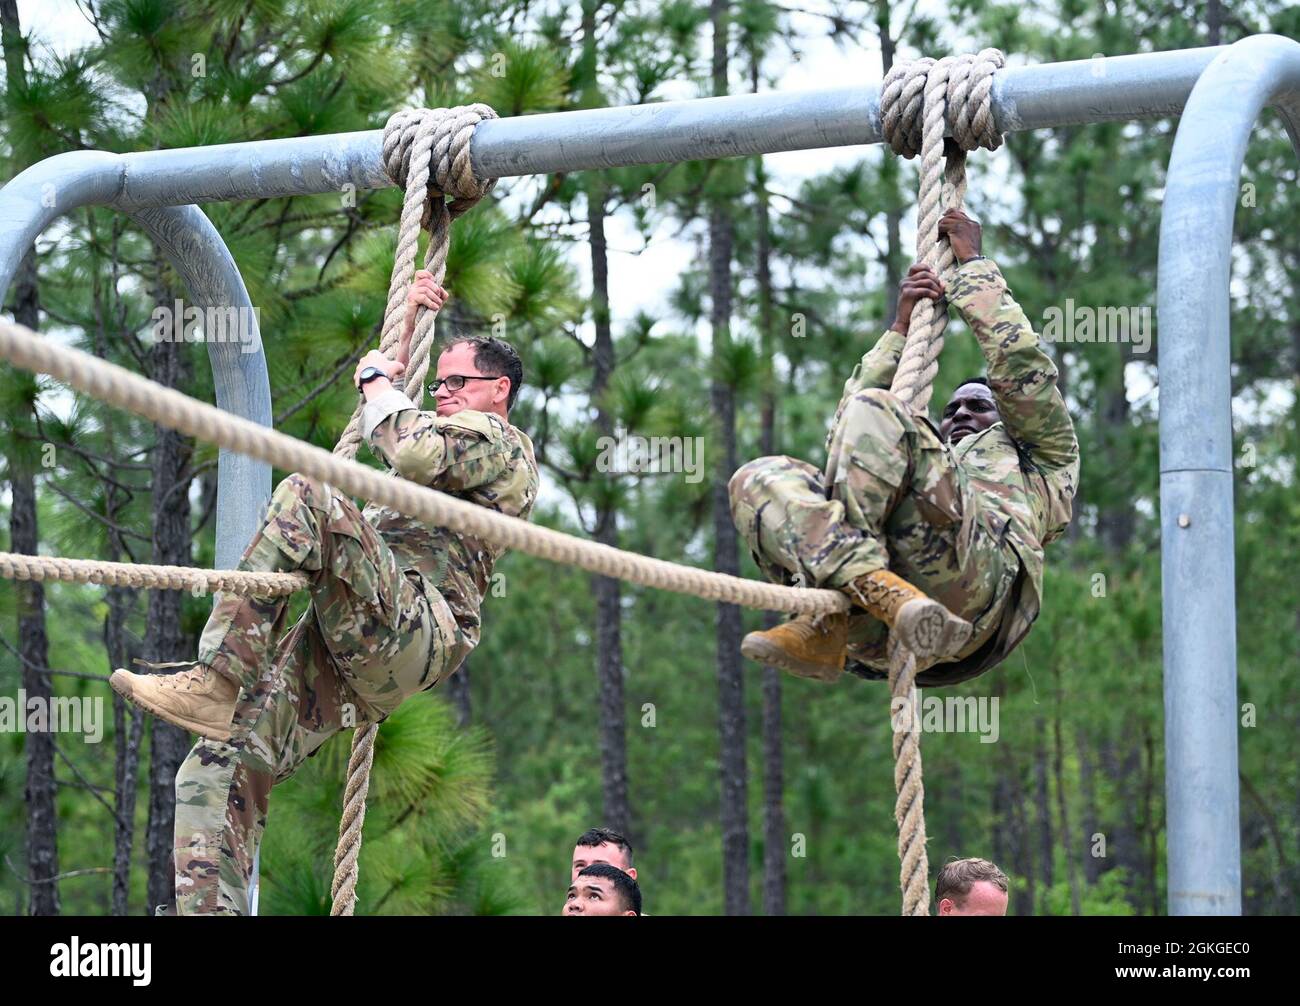 Soldiers from Support Battalion, 1st Special Warfare Training Group (Airborne) negotiate an obstacle during the battalion's Commander's Cup competition at Fort Bragg, North Carolina April 15, 2021. The Soldiers from each company competed in a ruck march, obstacle course, land navigation, Jeopardy-themed trivia contest and stress shoot with pistols and rifles. Stock Photo